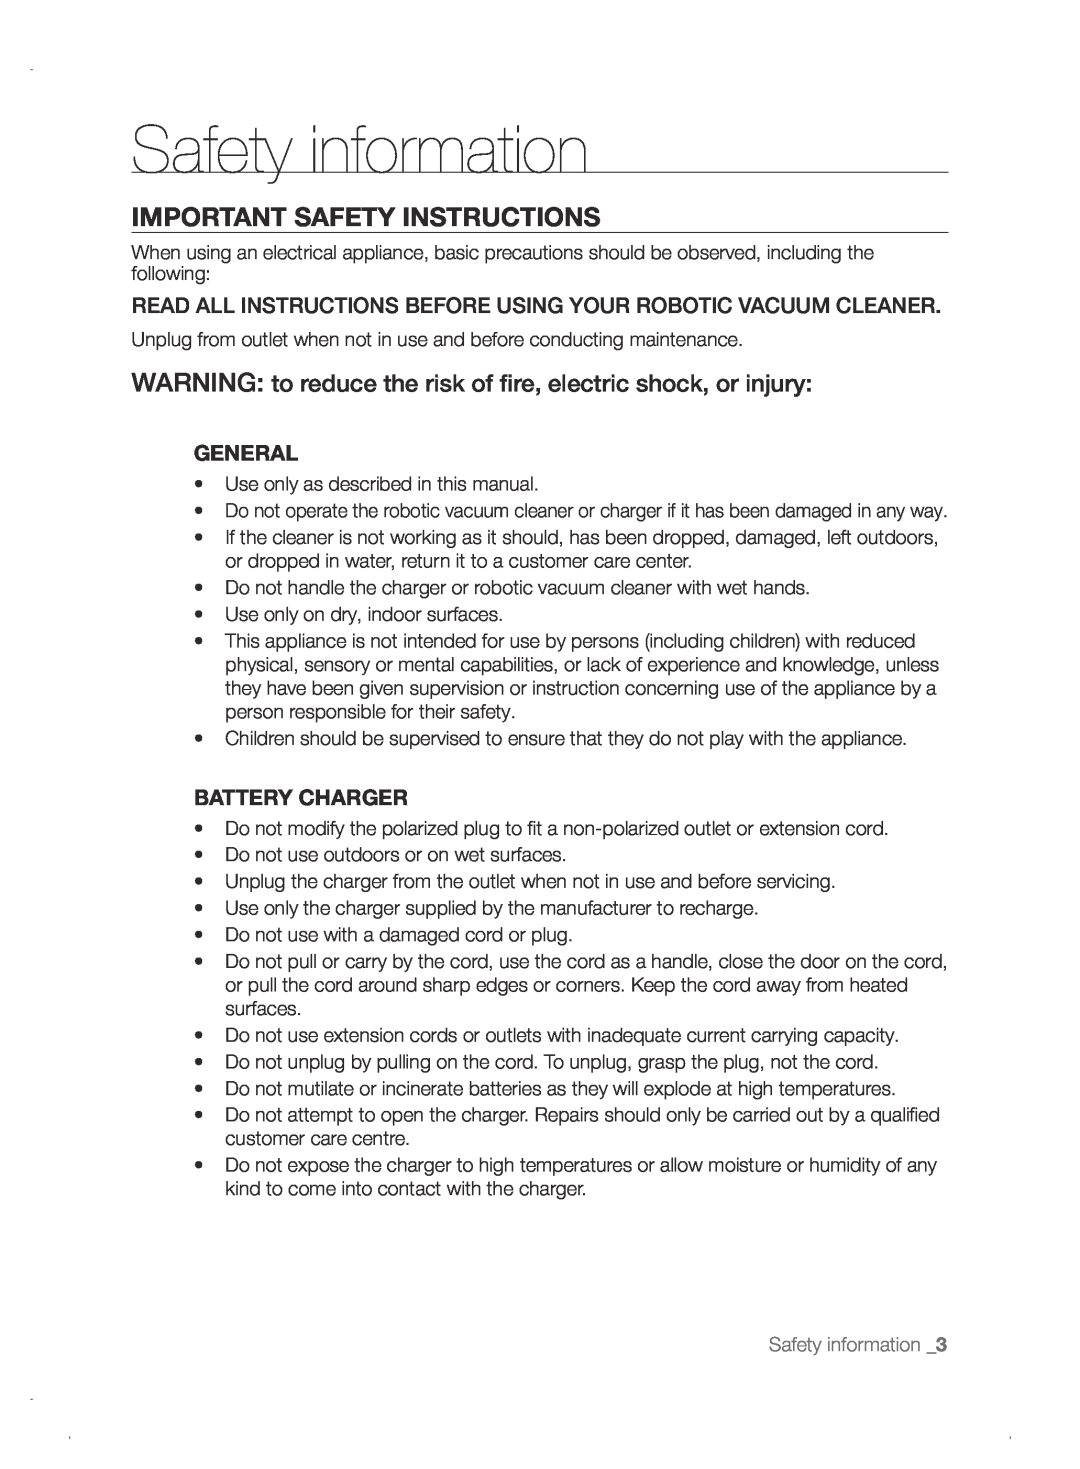 Samsung VCR8845T3A/XET manual Important Safety Instructions, WARNING to reduce the risk of fire, electric shock, or injury 